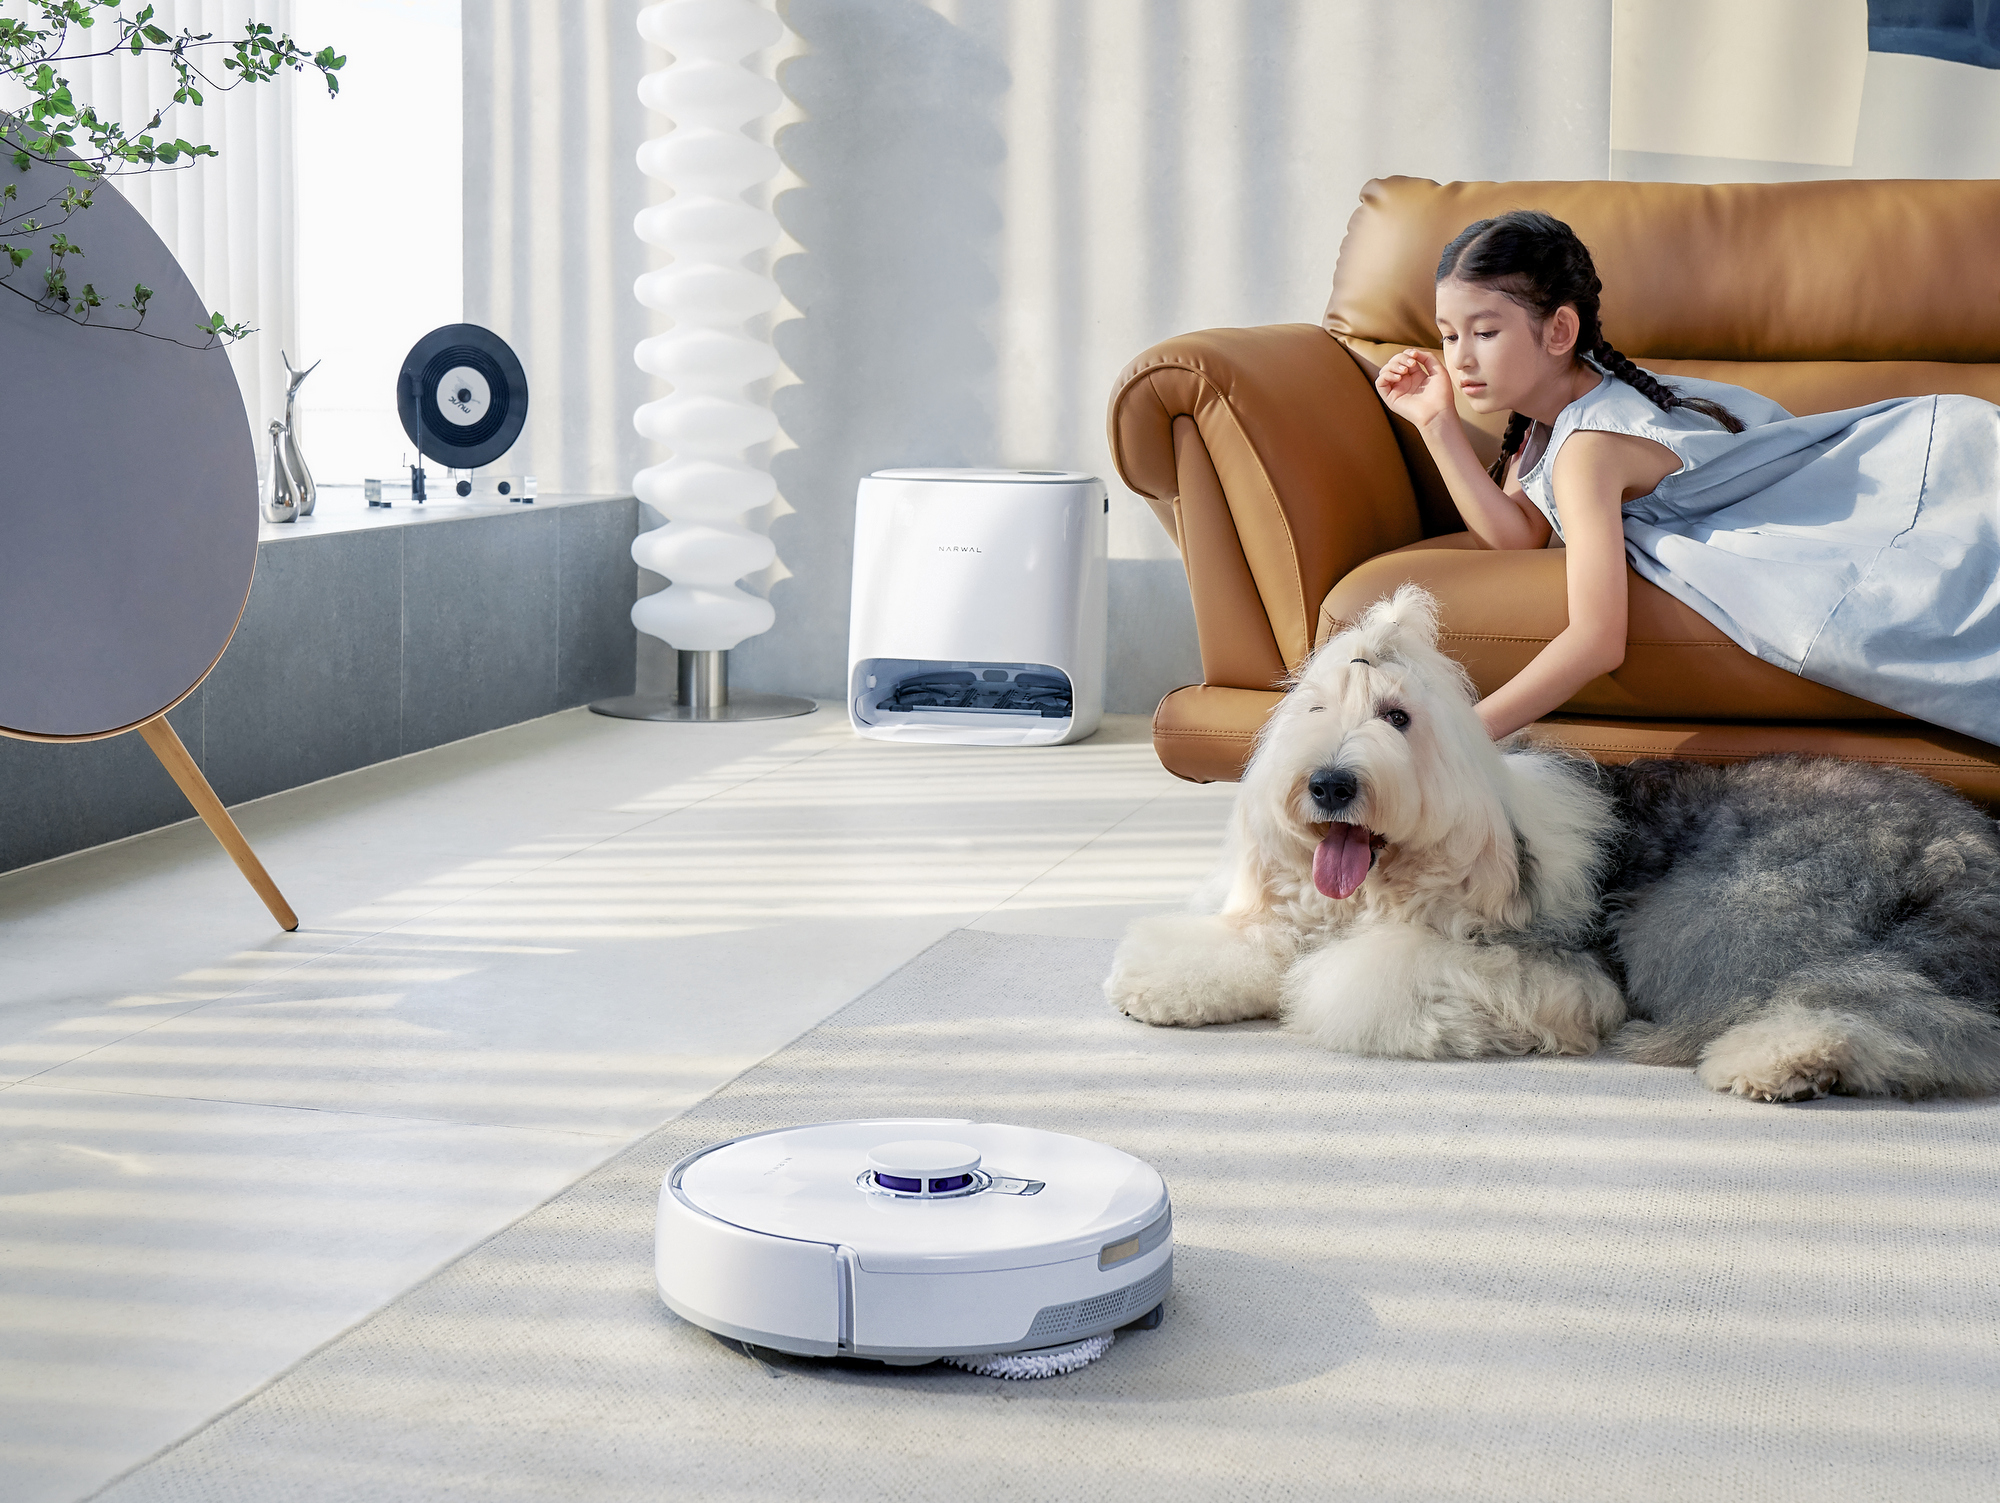 Narwal Freo X Ultra, Freo X Plus, and S10 Pro Wet Dry Vacuum: 3 New Ways to Clean That Will Make Your Life Easier